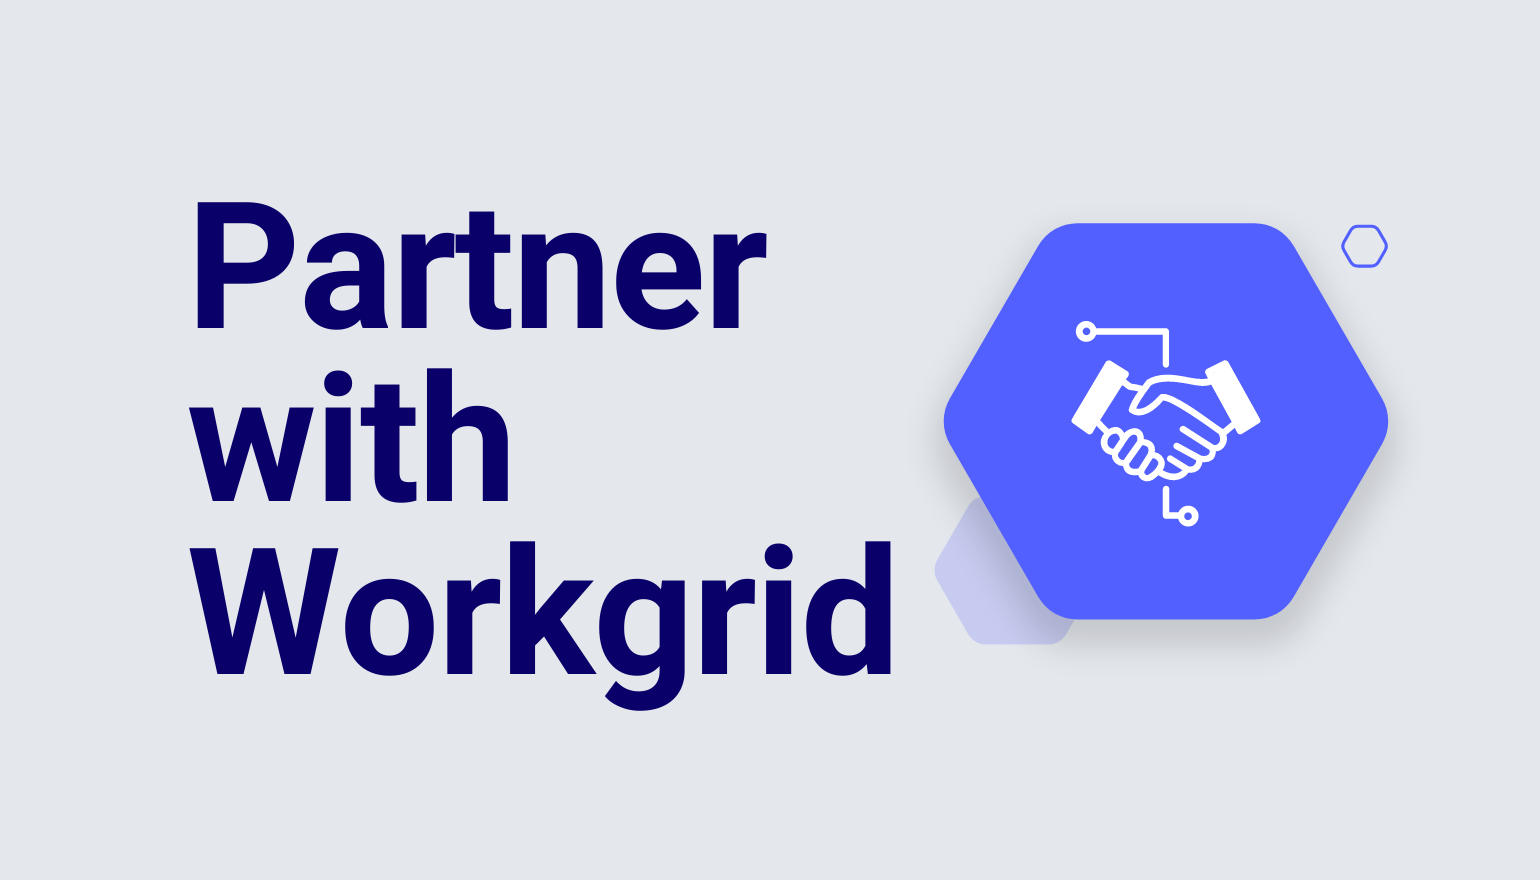 Partner with Workgrid